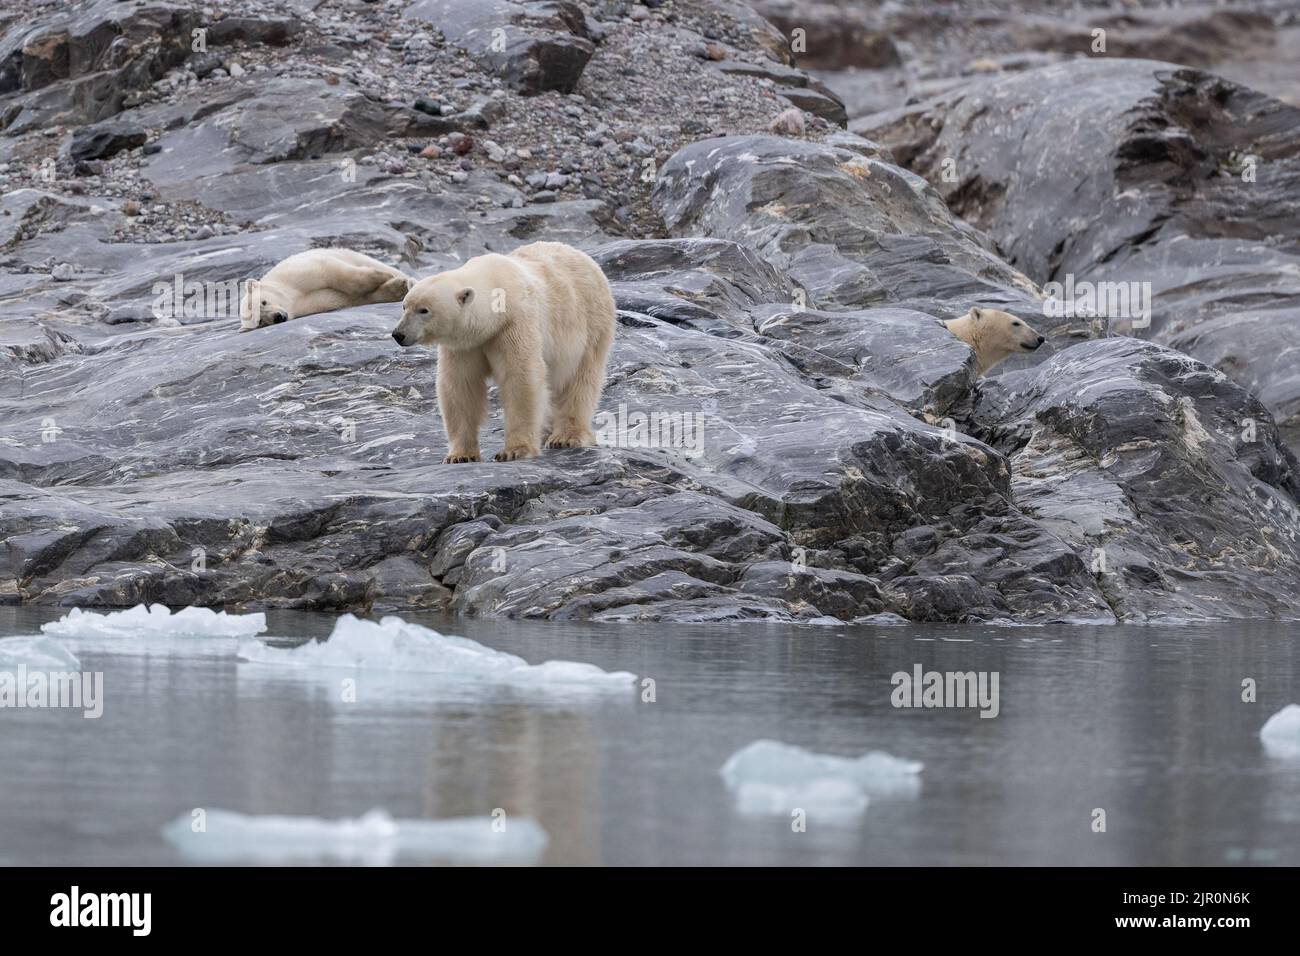 A view of polar bears on a rocky shore against melting ice at Svalbard Stock Photo